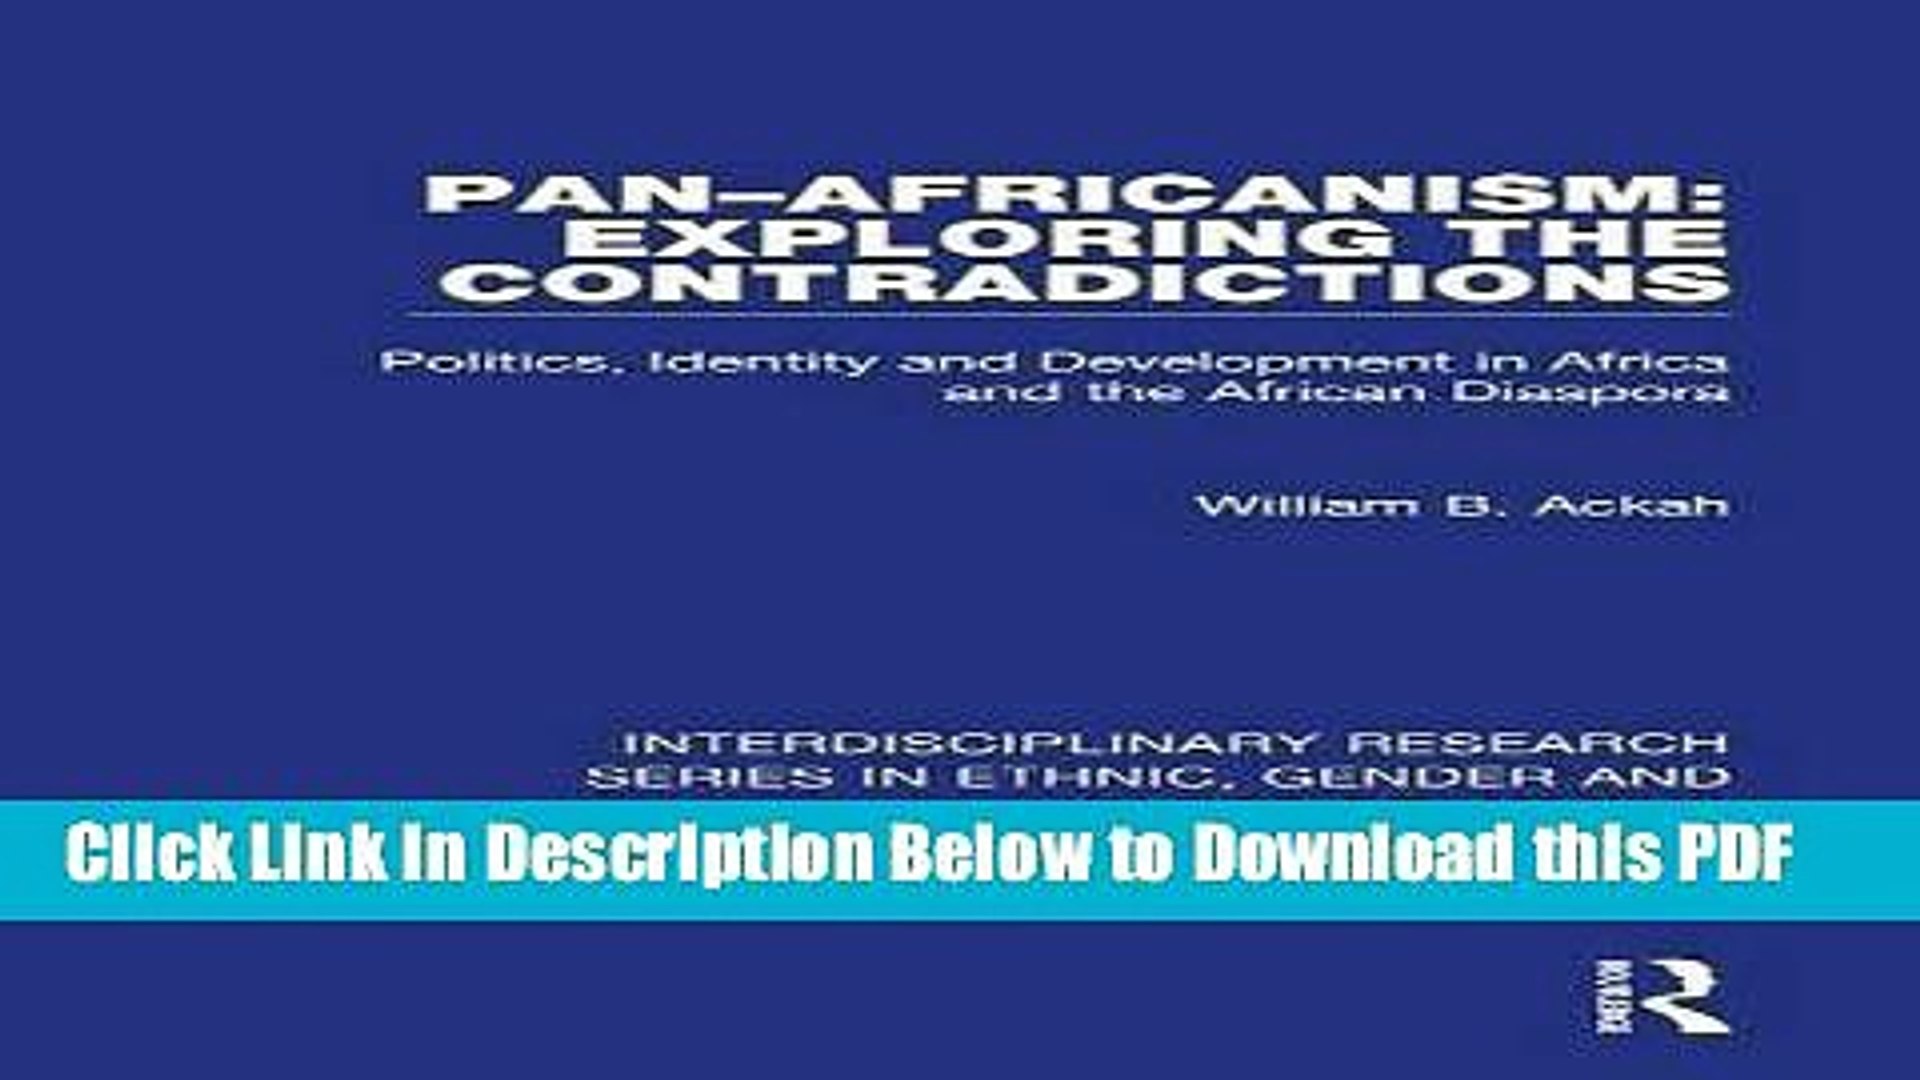 ⁣[Read] Pan-Africanism: Exploring the Contradictions: Politics, Identity and Development in Africa